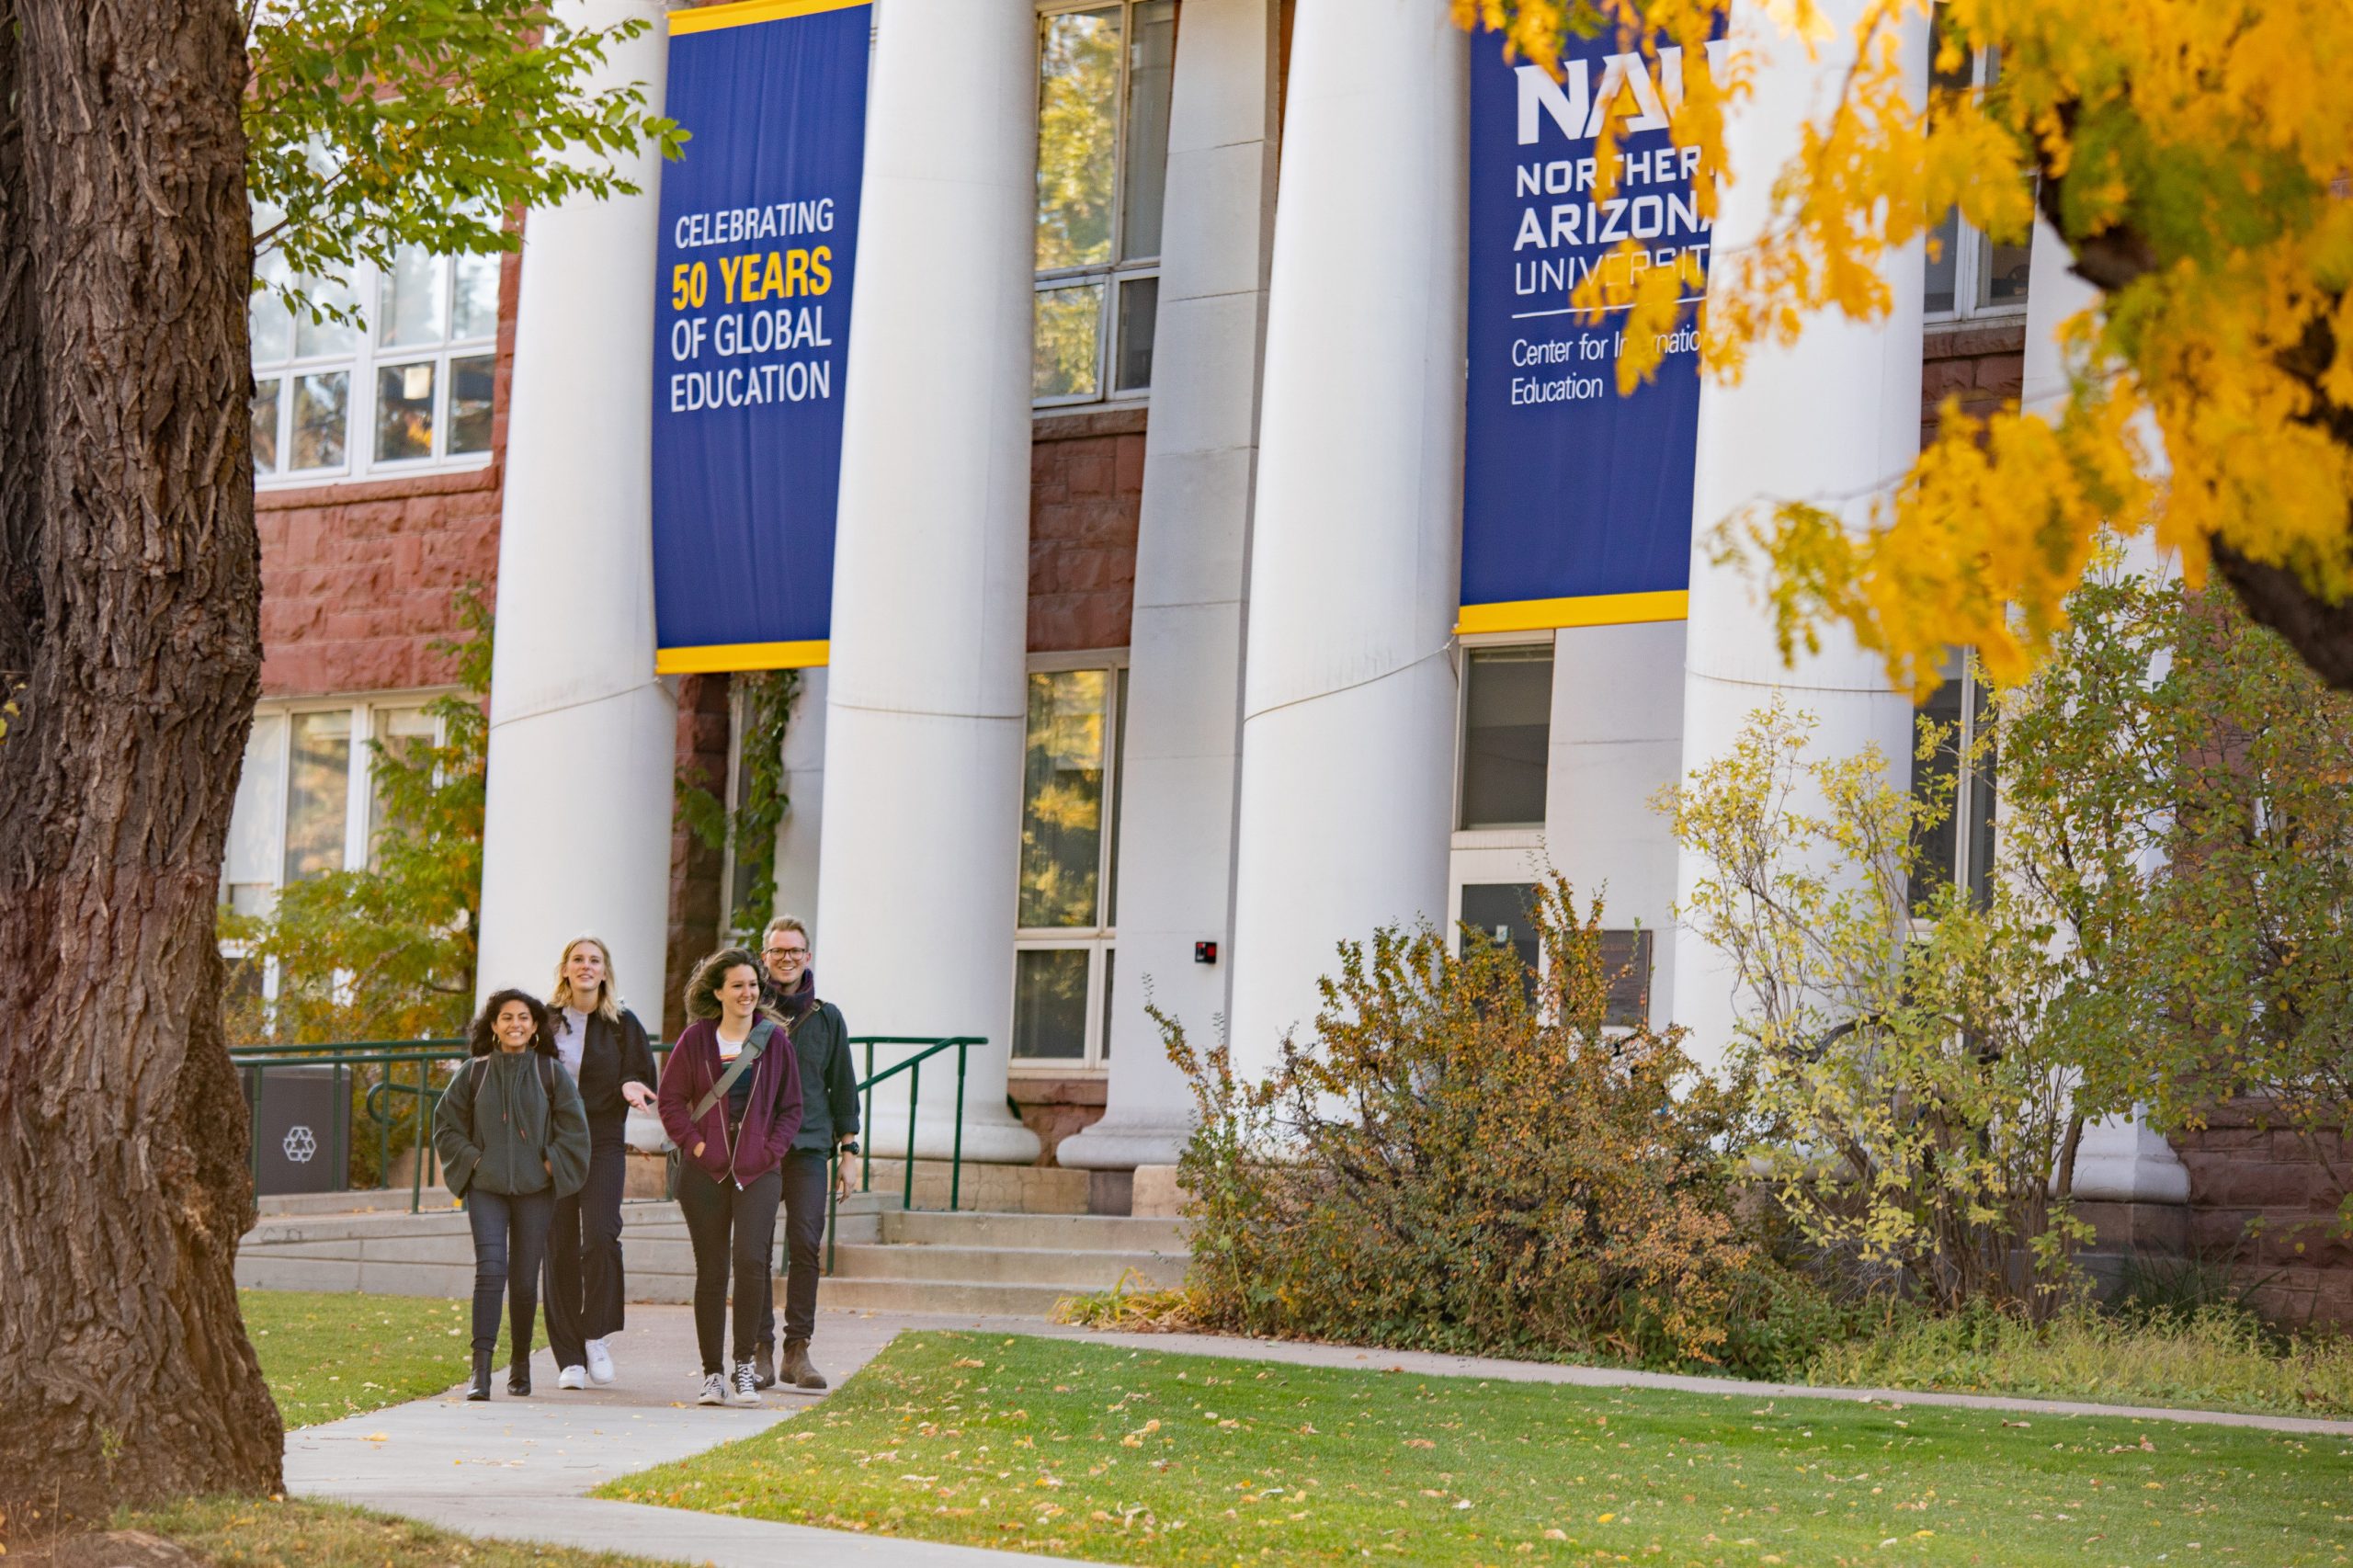 Four students smiling while leaving the 50th anniversary of Global Education at NAU.